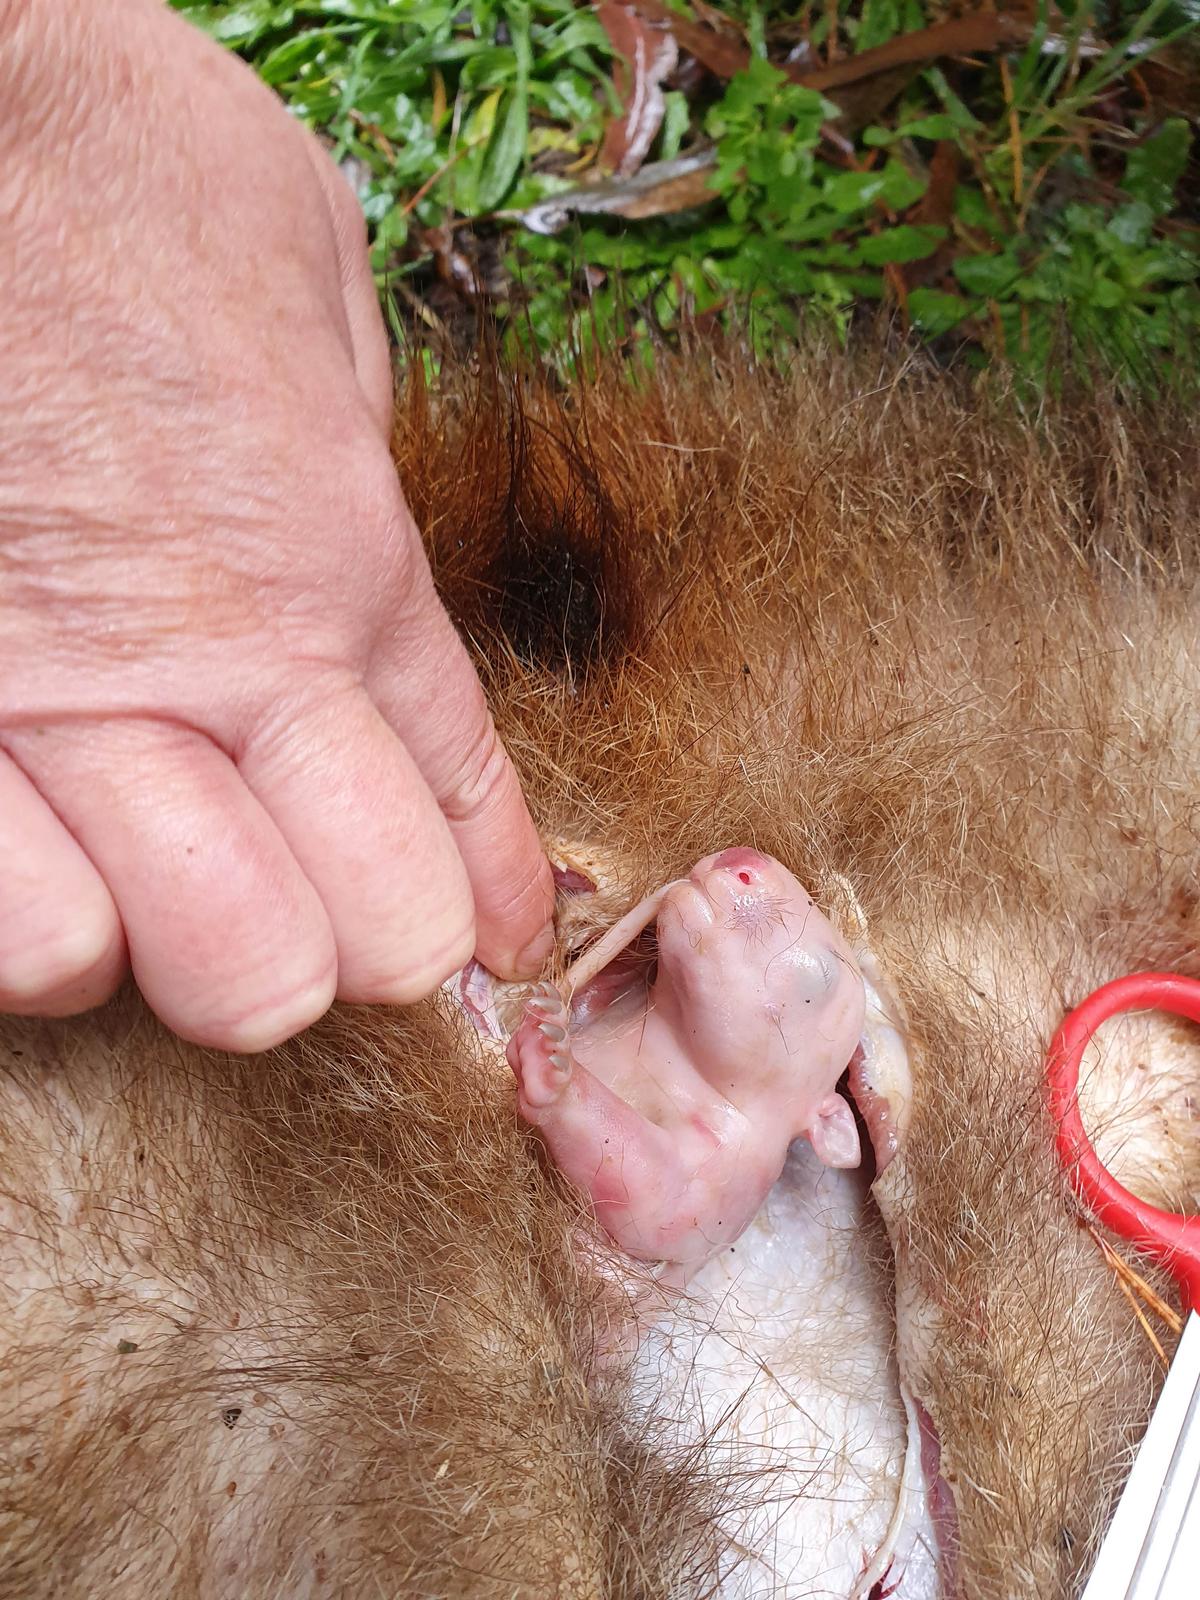 The mother wombat's pouch was cut open. (Caters News)